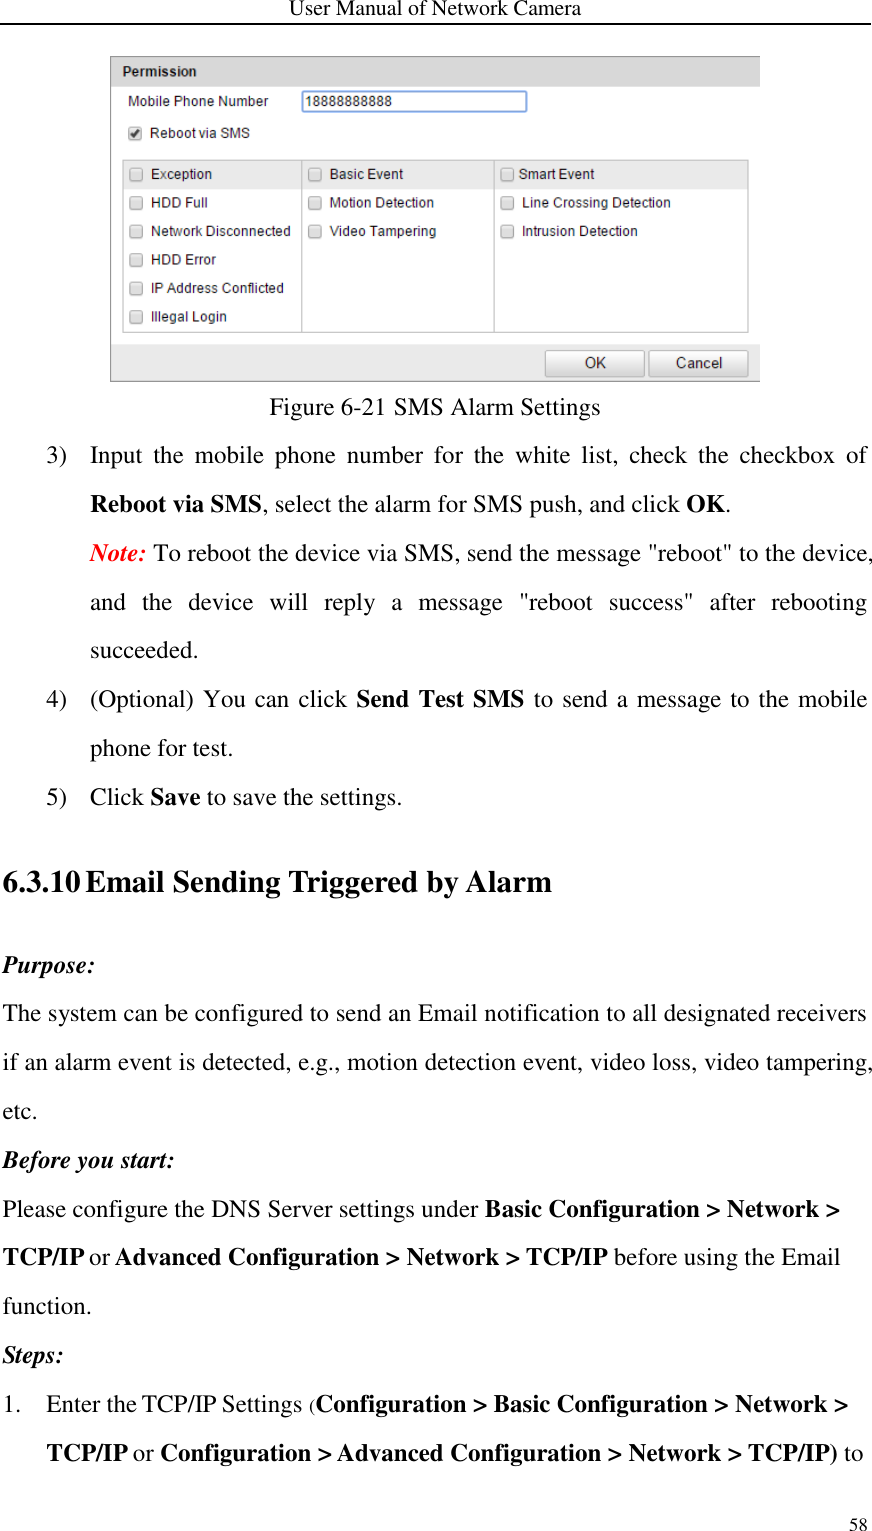 User Manual of Network Camera 58   Figure 6-21 SMS Alarm Settings 3) Input  the  mobile  phone  number  for  the  white  list,  check  the  checkbox  of Reboot via SMS, select the alarm for SMS push, and click OK. Note: To reboot the device via SMS, send the message &quot;reboot&quot; to the device, and  the  device  will  reply  a  message  &quot;reboot  success&quot;  after  rebooting succeeded.   4) (Optional) You can click Send Test SMS to send a message to the mobile phone for test. 5) Click Save to save the settings. 6.3.10 Email Sending Triggered by Alarm Purpose: The system can be configured to send an Email notification to all designated receivers if an alarm event is detected, e.g., motion detection event, video loss, video tampering, etc. Before you start: Please configure the DNS Server settings under Basic Configuration &gt; Network &gt; TCP/IP or Advanced Configuration &gt; Network &gt; TCP/IP before using the Email function. Steps: 1. Enter the TCP/IP Settings (Configuration &gt; Basic Configuration &gt; Network &gt; TCP/IP or Configuration &gt; Advanced Configuration &gt; Network &gt; TCP/IP) to 